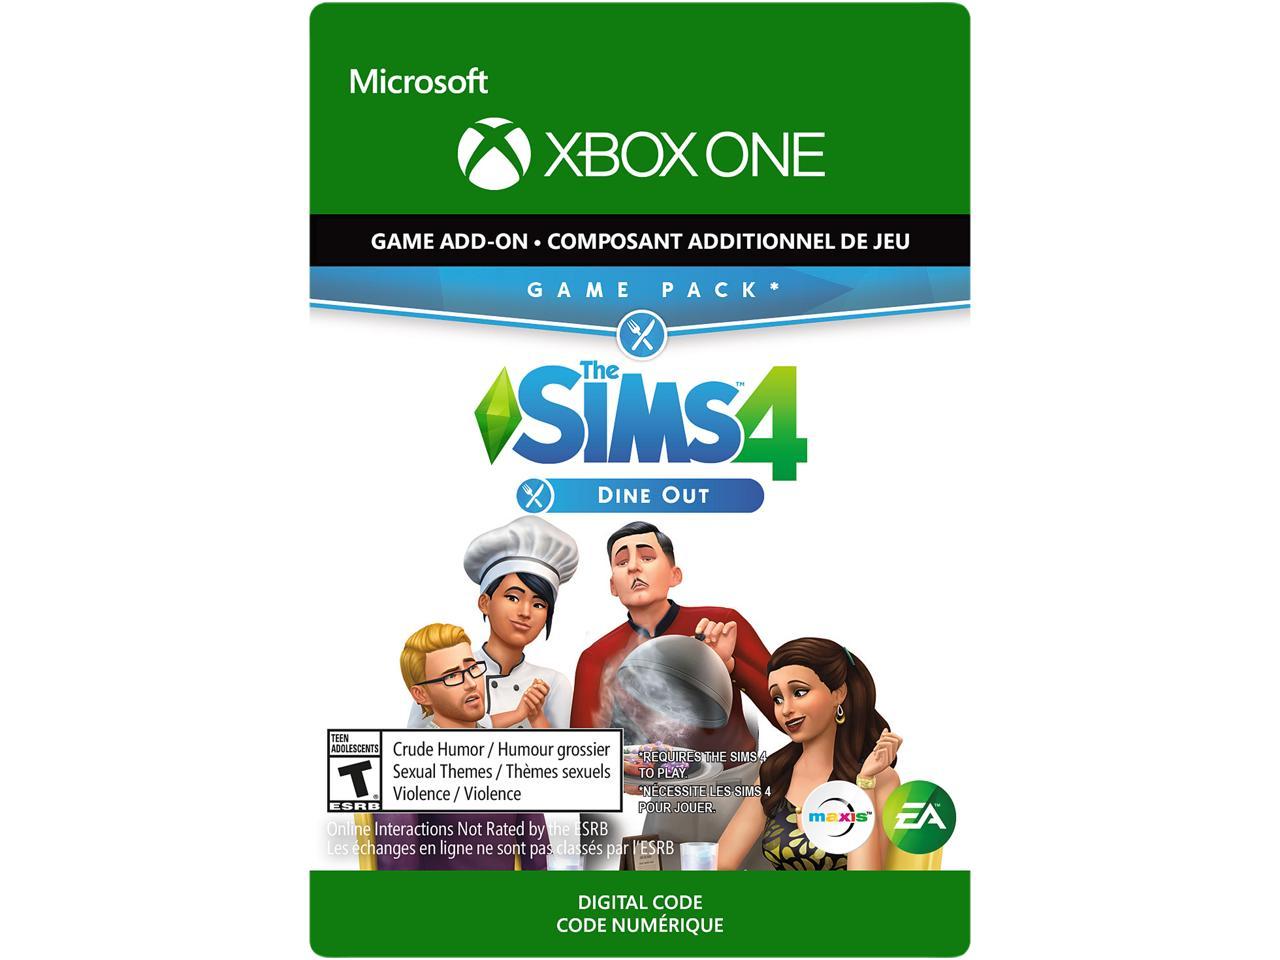 voorspelling Worden Woord THE SIMS 4 (GP3) DINE OUT Xbox One [Digital Code] - Newegg.com